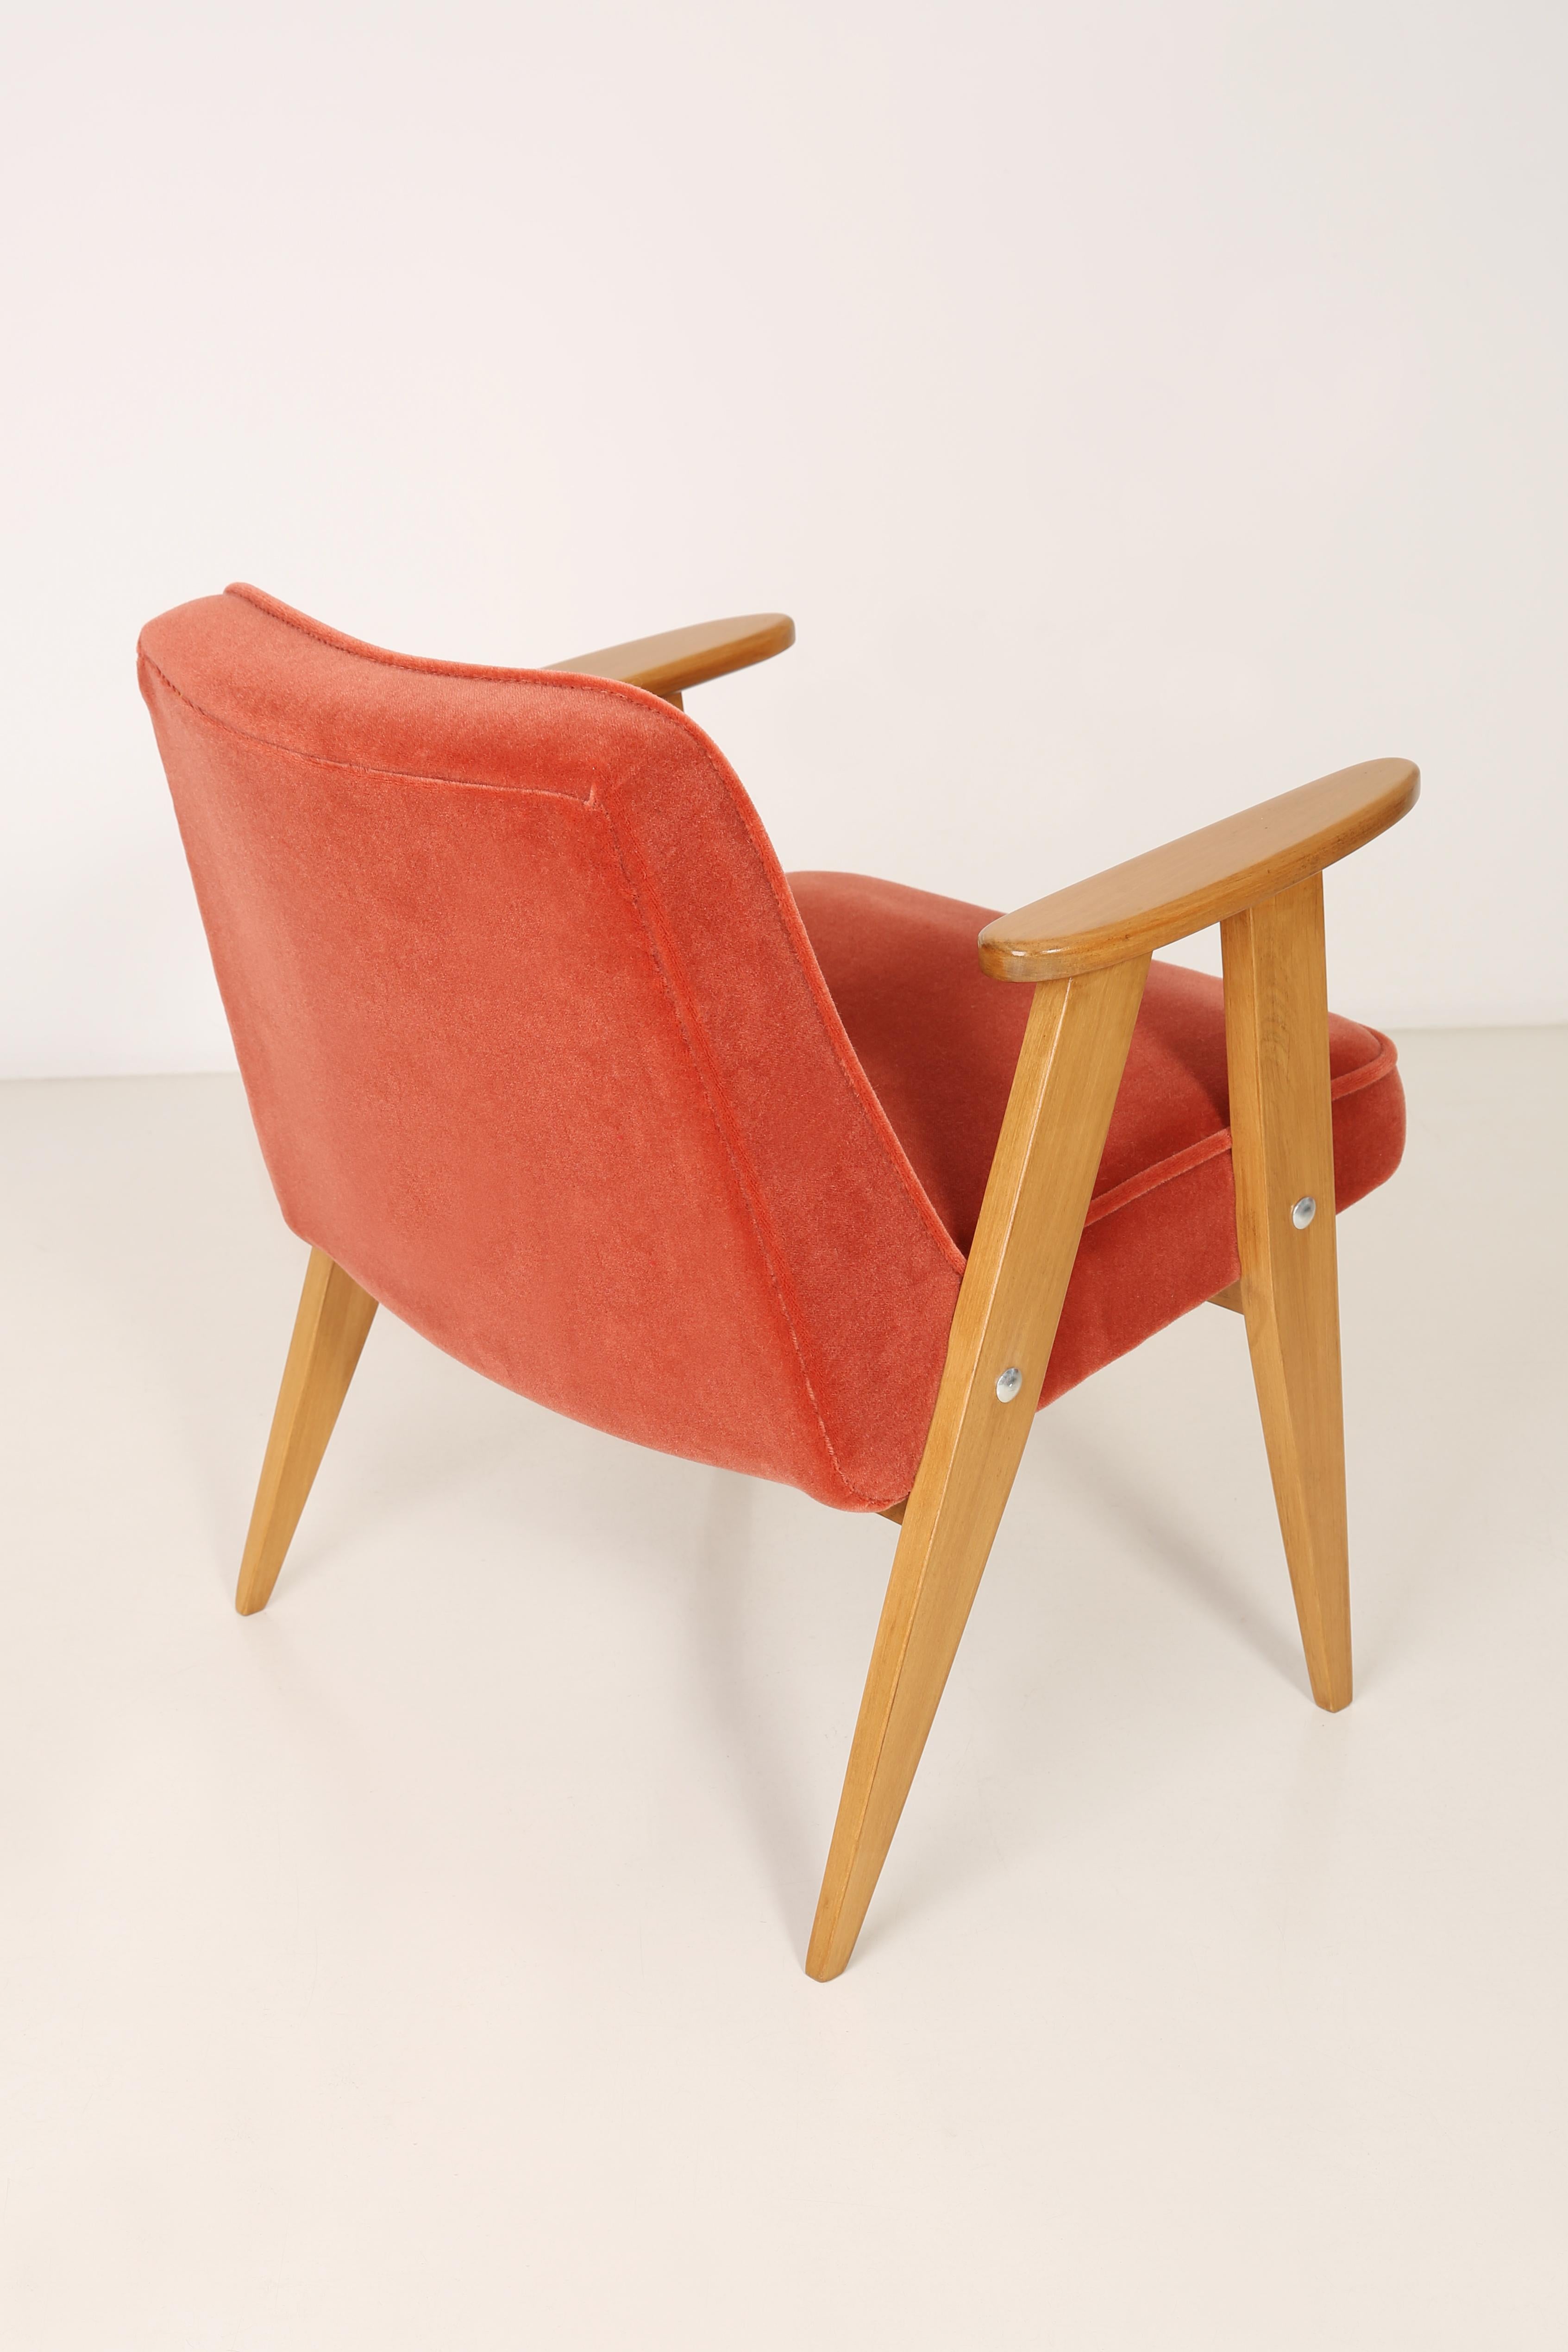 Textile Set of Two 366 Armchair, Jozef Chierowski, 1960s For Sale